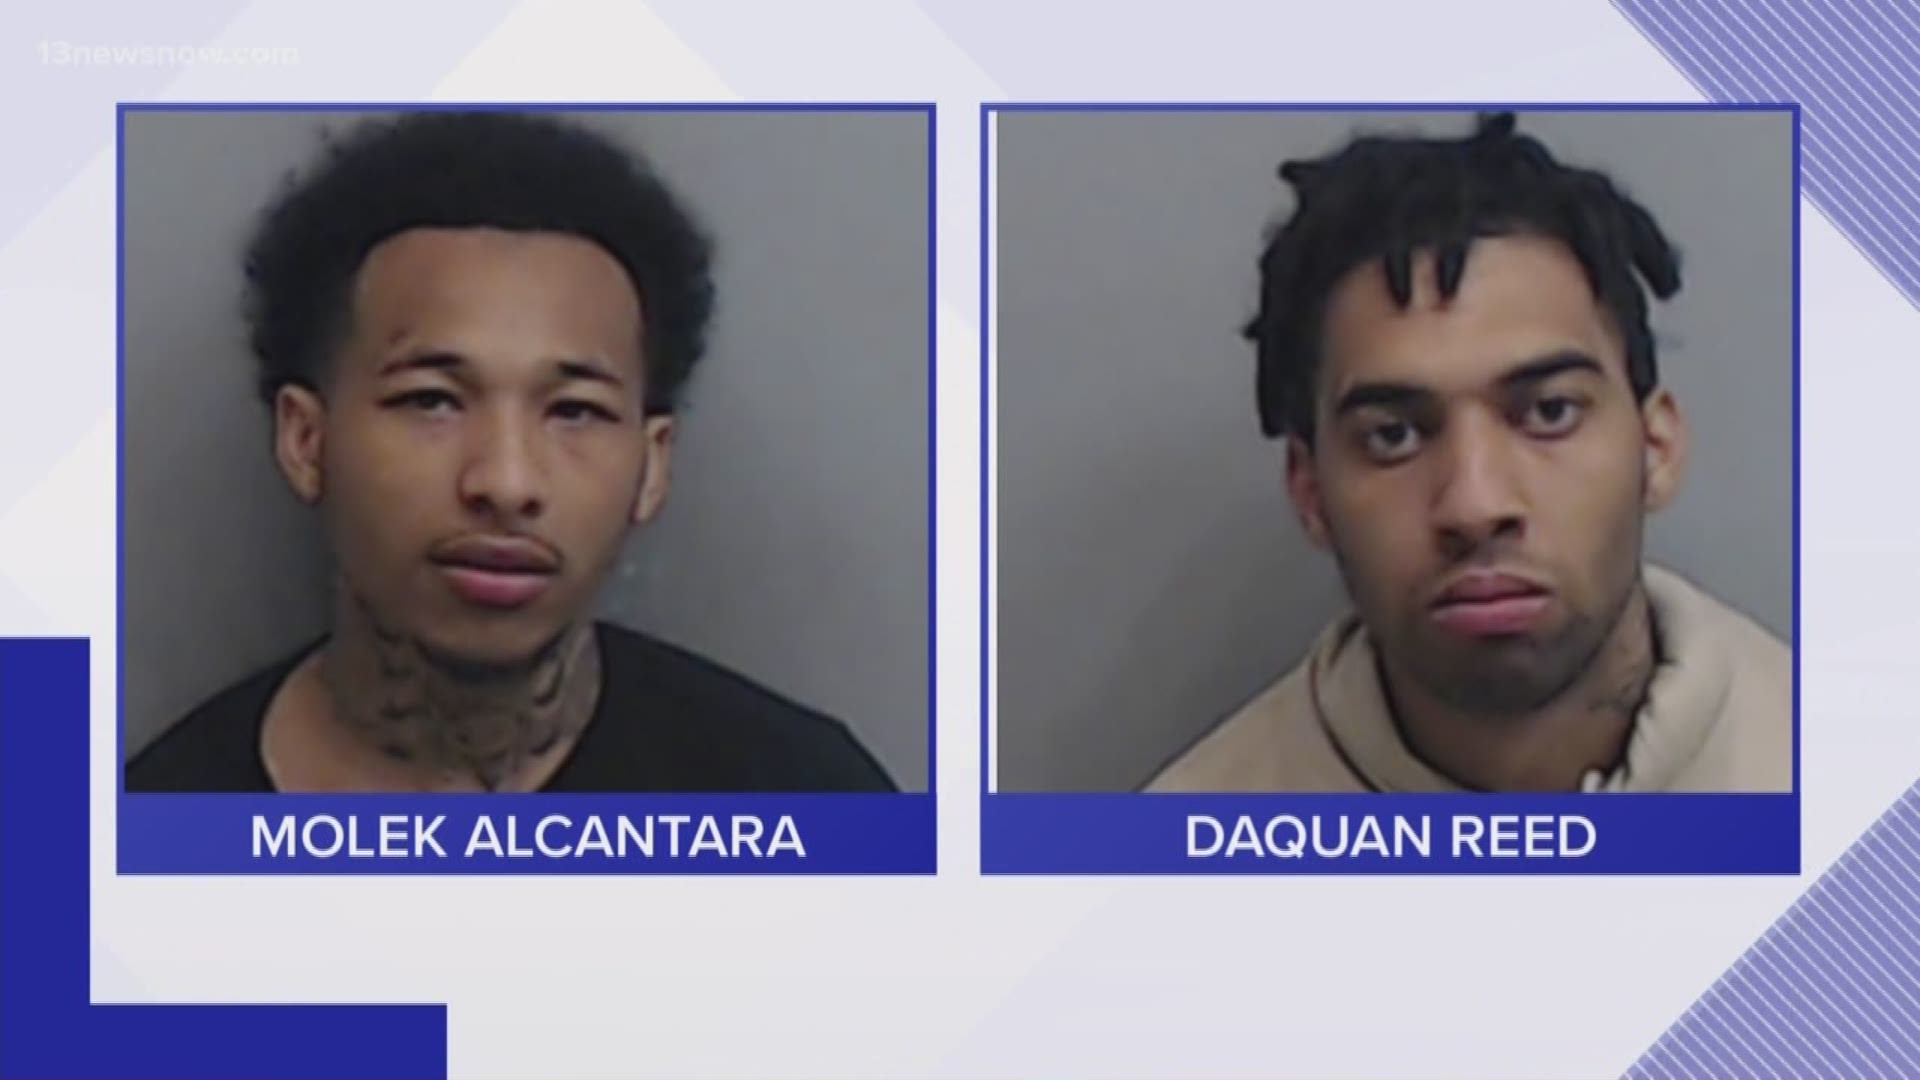 Police arrested 23-year-old Molek Alcantara and 22-year-old Daquan C. Reed in Atlanta. They were wanted for Monday's double shooting at MacArthur Center.